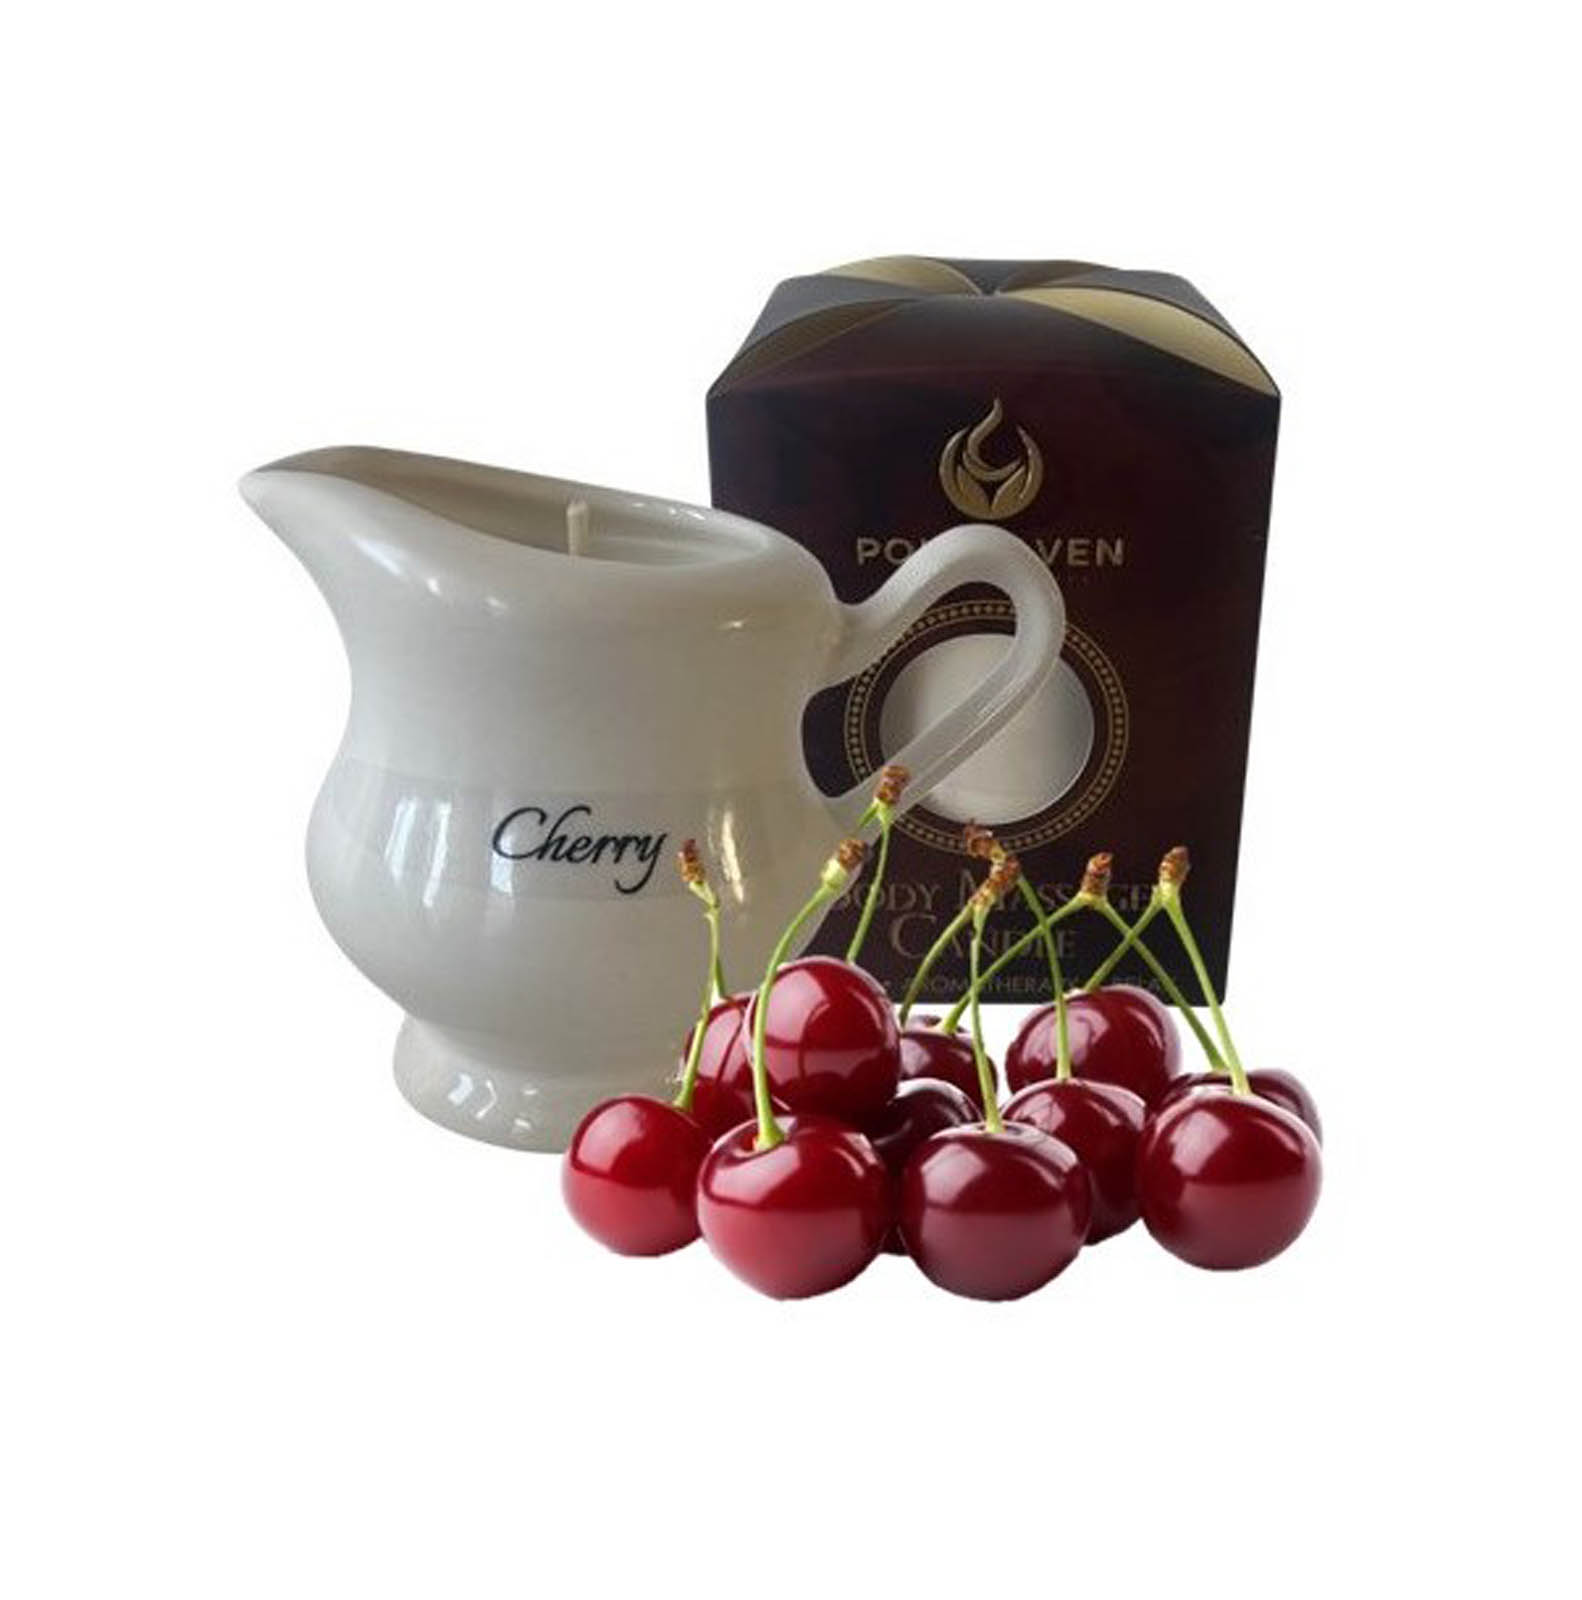 Jar containing Cherry hot oil massage candle with the decorative box in the background